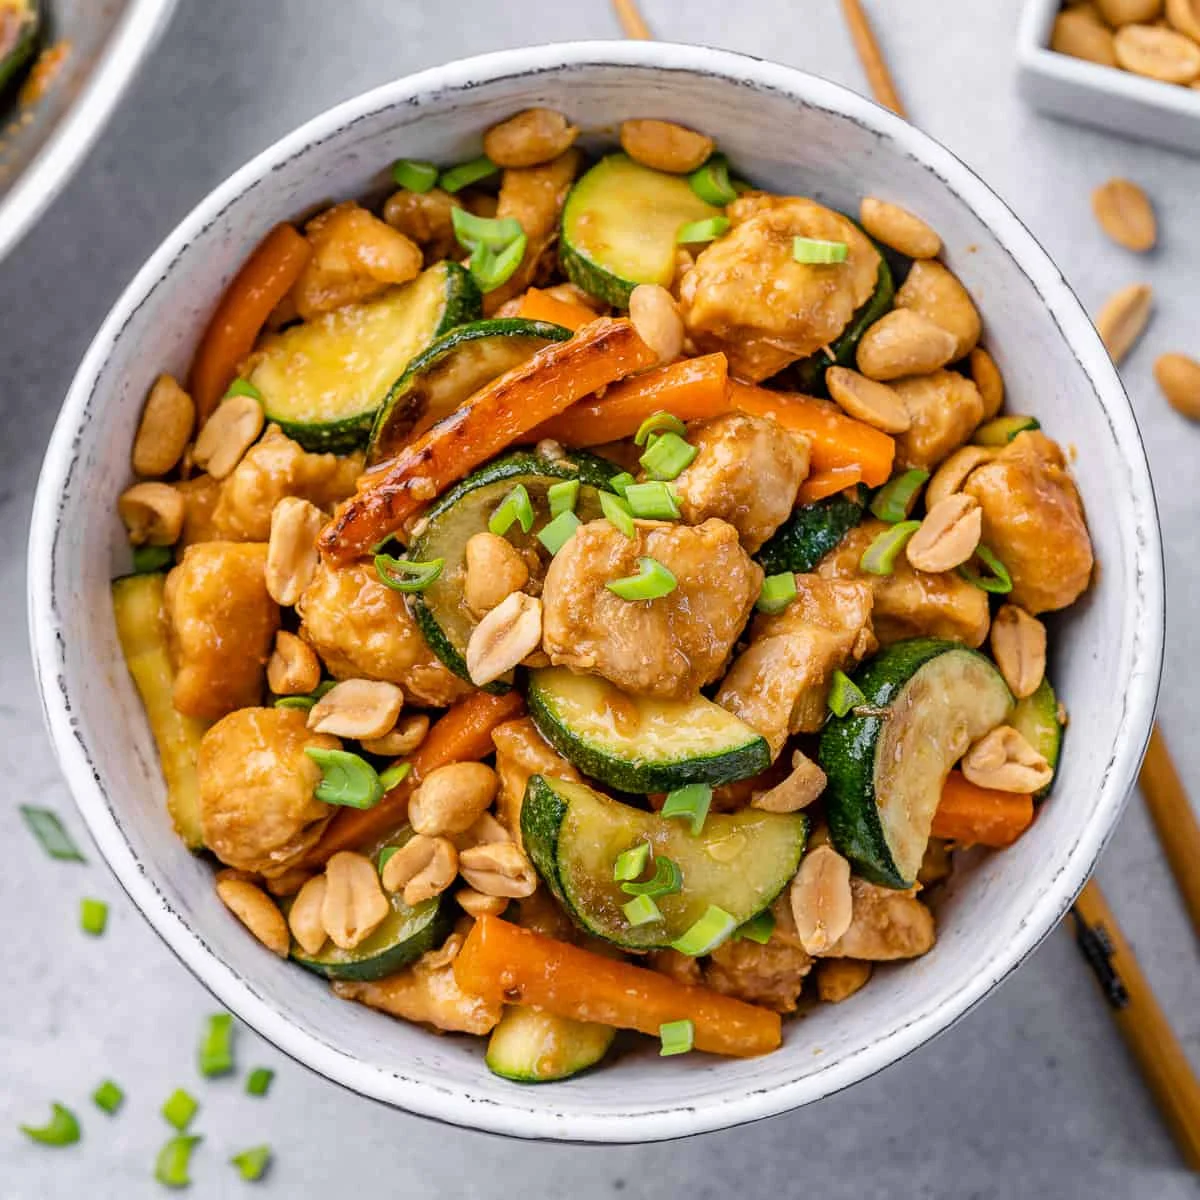 Copy-of-Chicken-and-Zucchini-Stir-fry-7 Seven Best Homemade Gluten-Free Snacks and Salads From Sunrise to Sunset